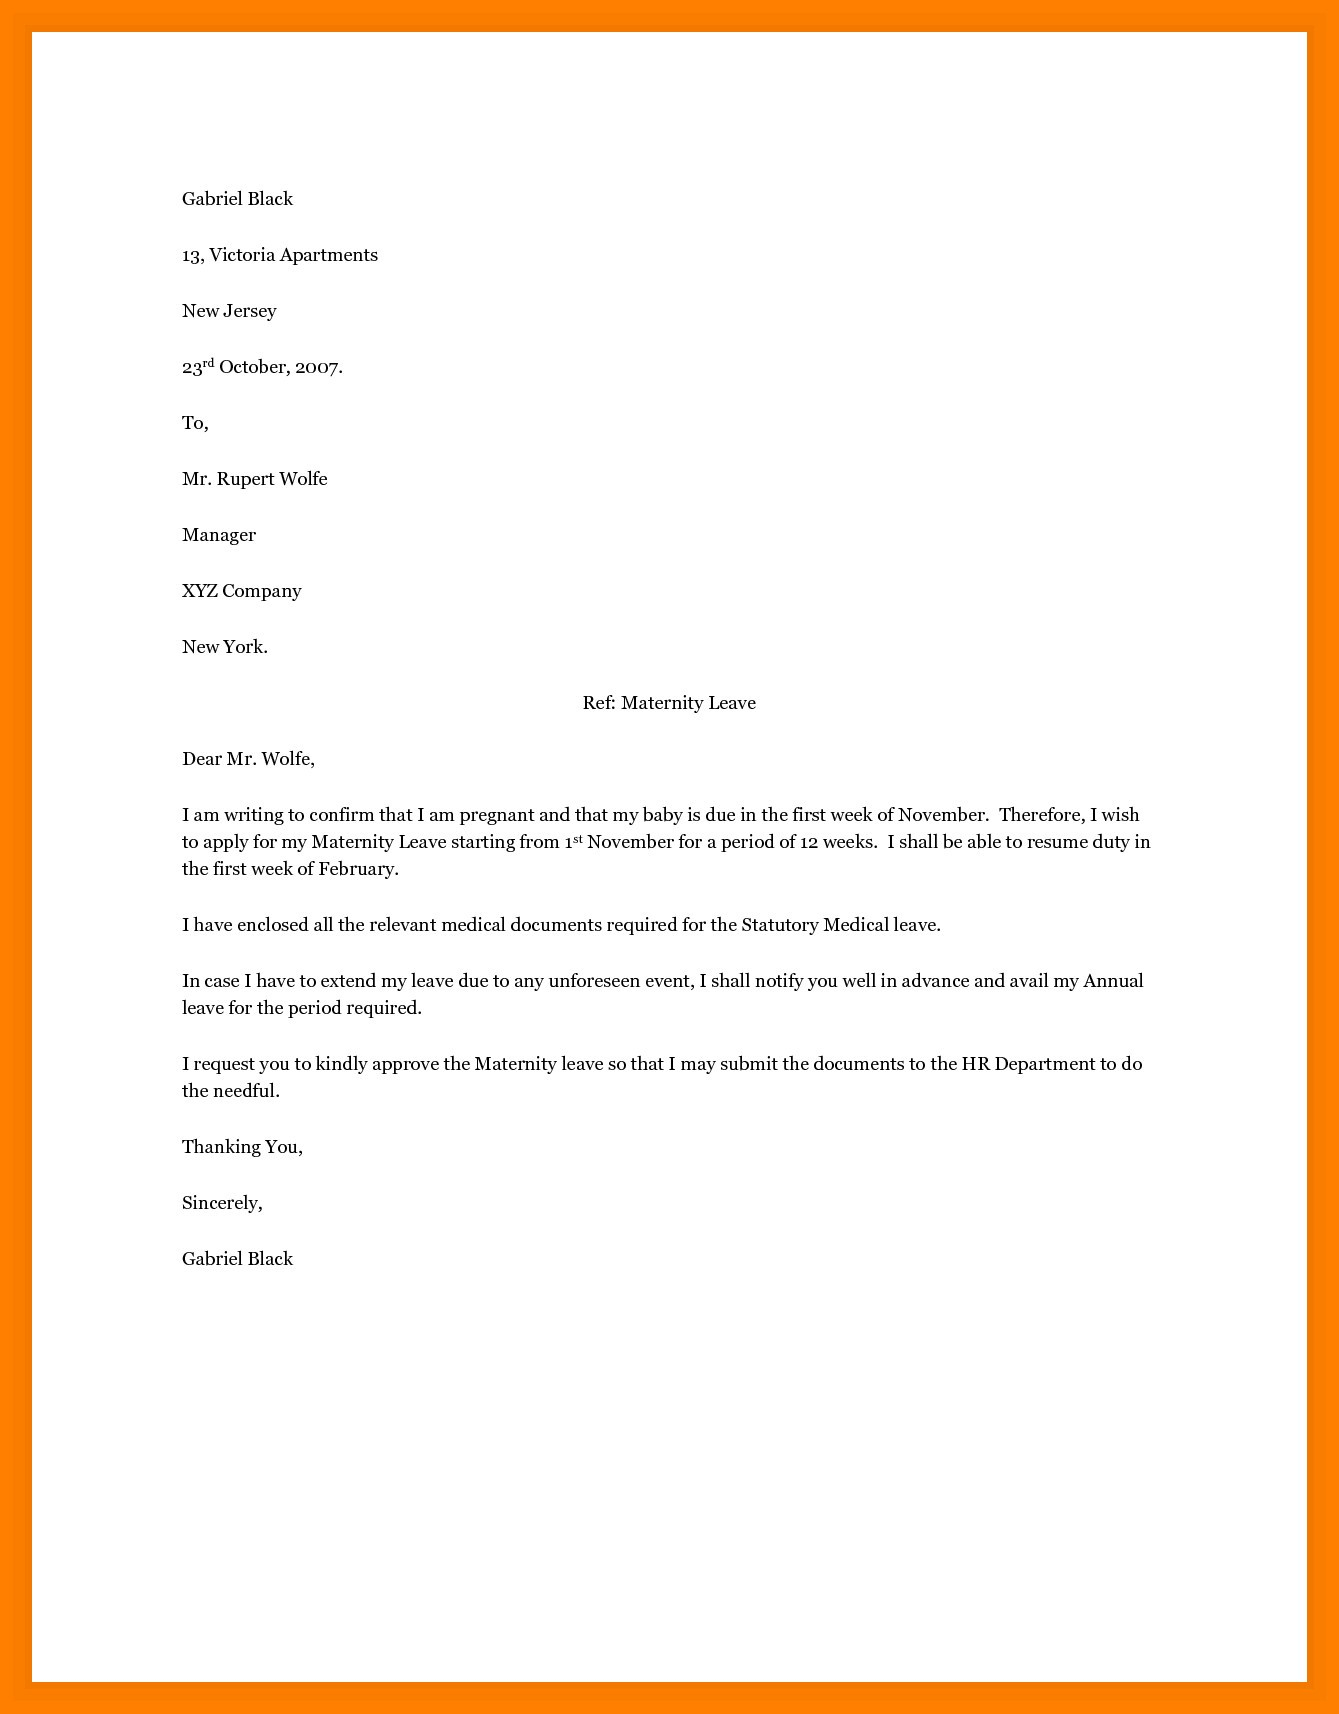 Vacation Request Letter Template - Template Letter Maternity Leave Employer Best Of 9 Sample Template